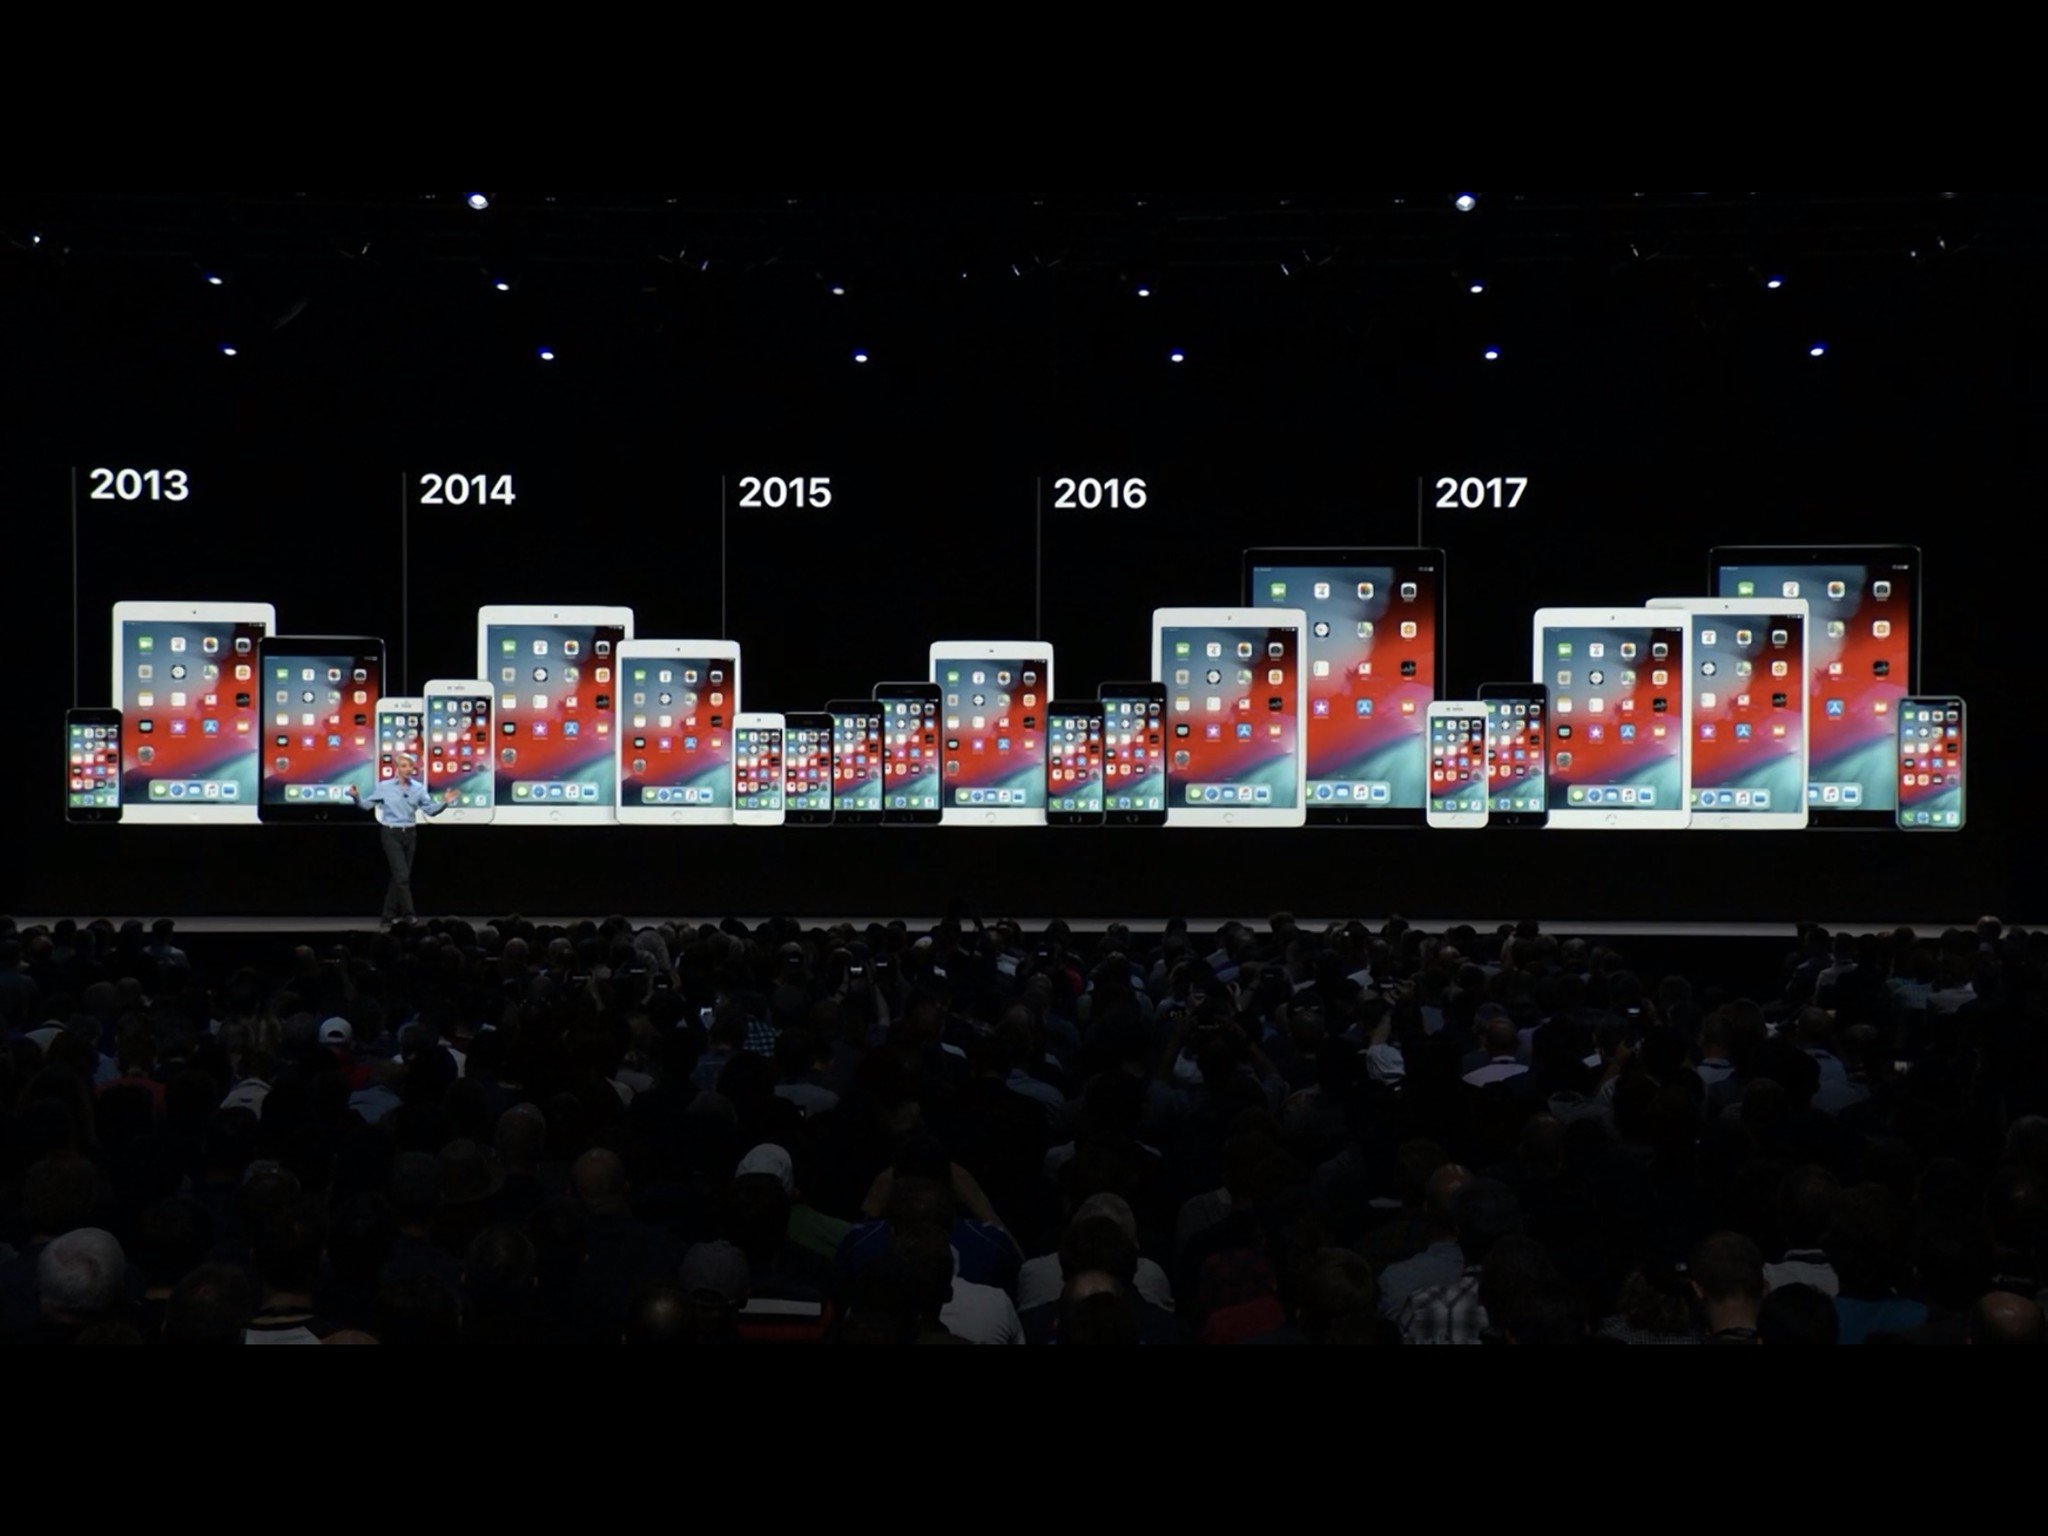 These are the iPhones and iPads that will run iOS 12